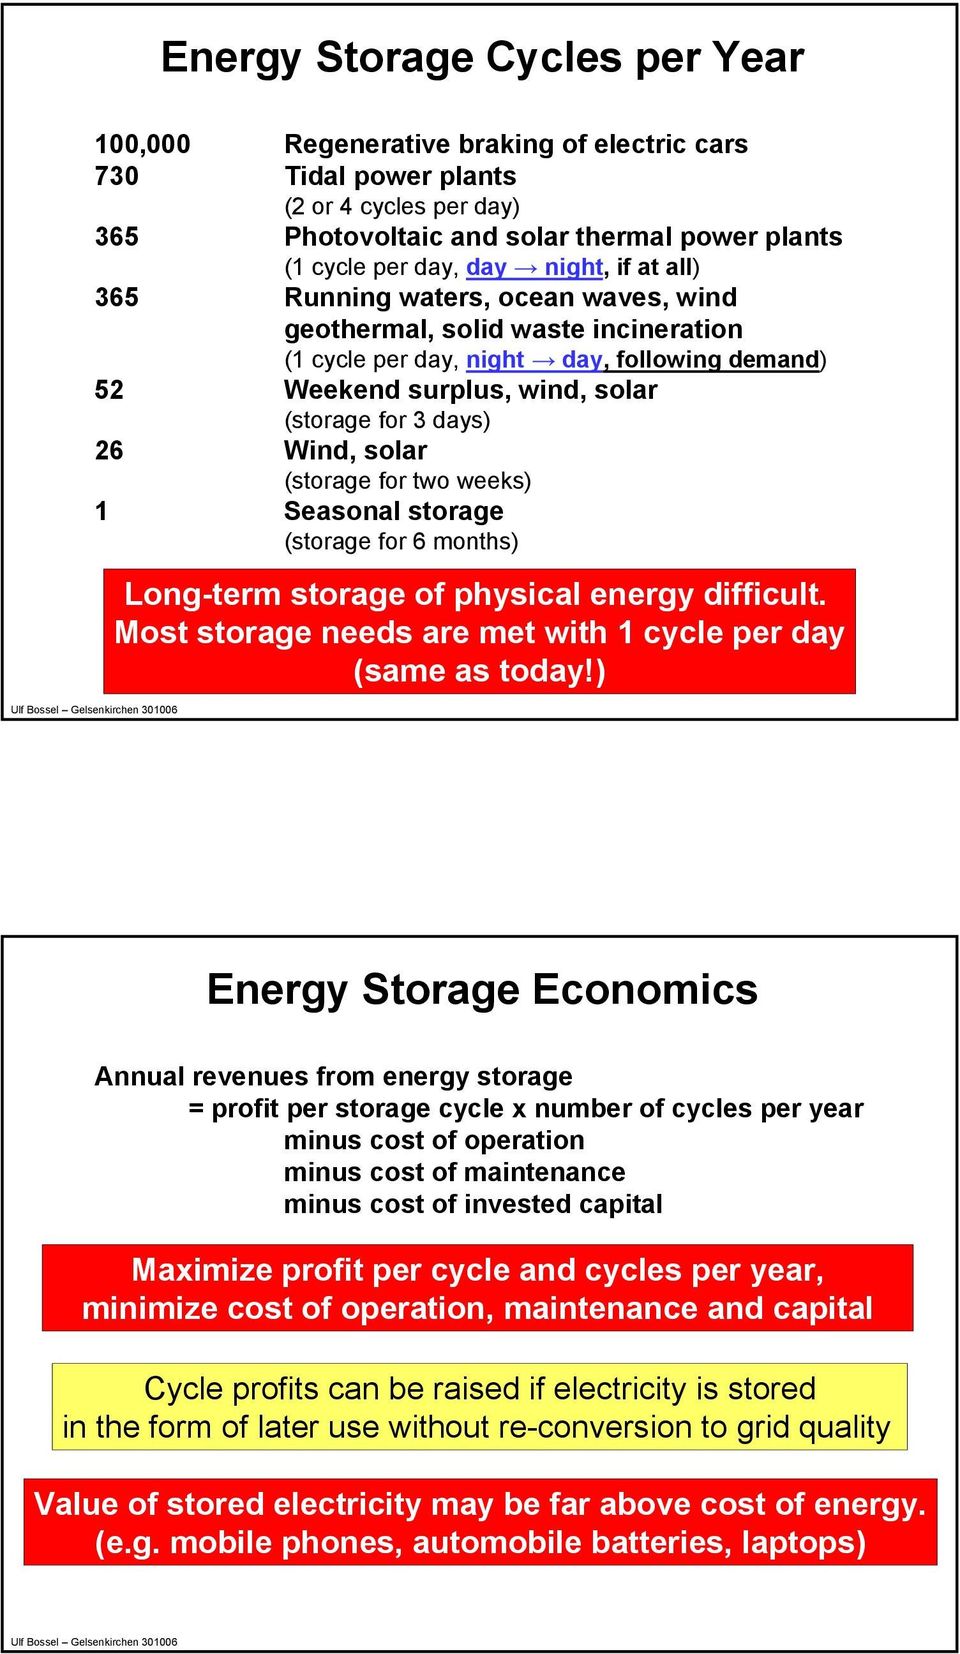 Wind, solar (storage for two weeks) 1 Seasonal storage (storage for 6 months) Long-term storage of physical energy difficult. Most storage needs are met with 1 cycle per day (same as today!